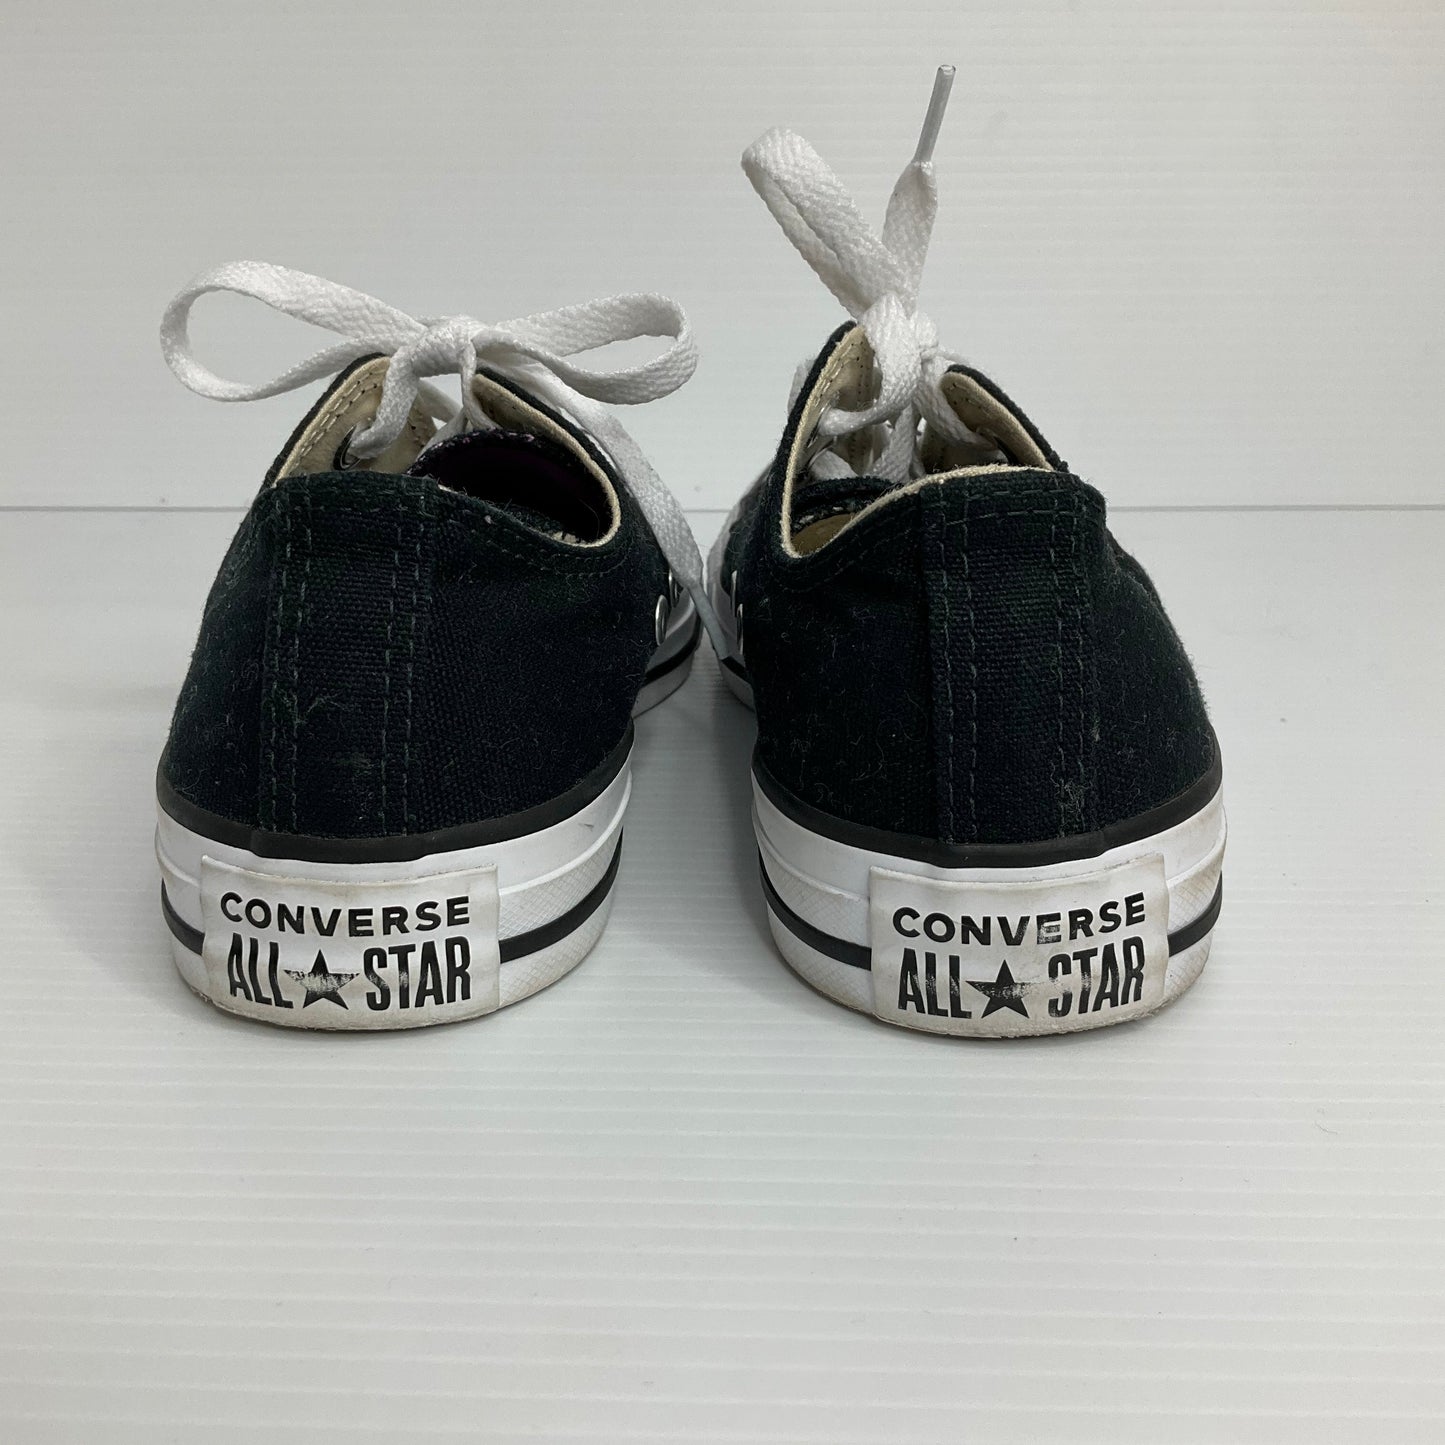 Black Shoes Sneakers Converse, Size 6